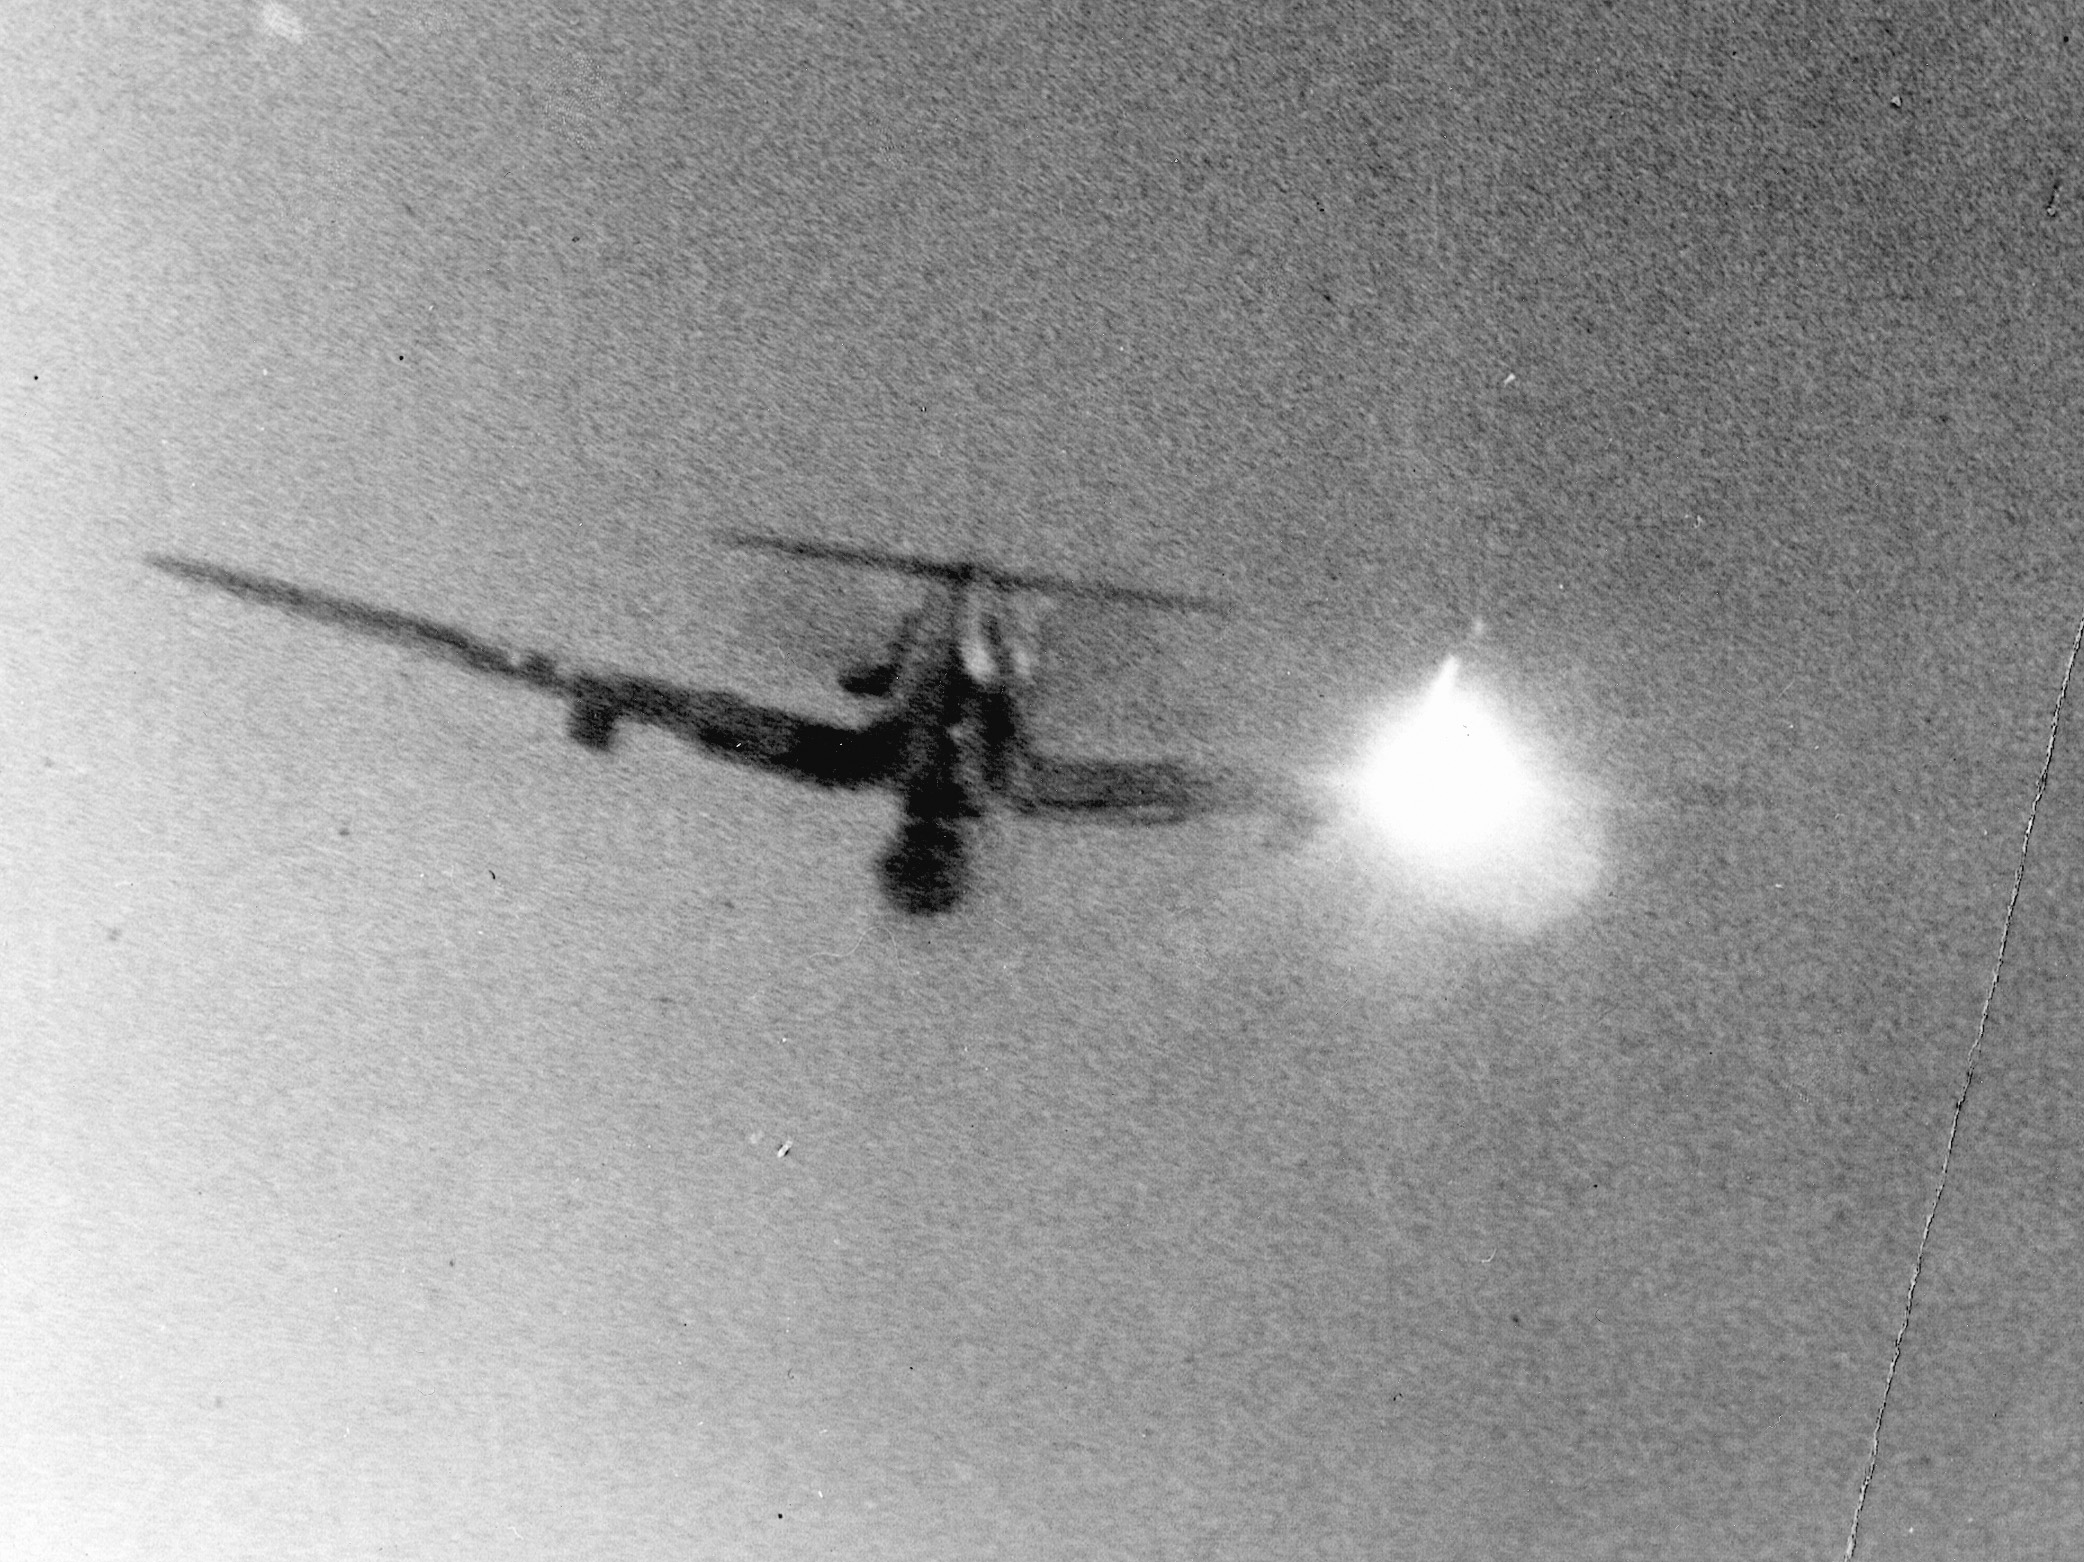 An ME-109 is shot down in November 1943.